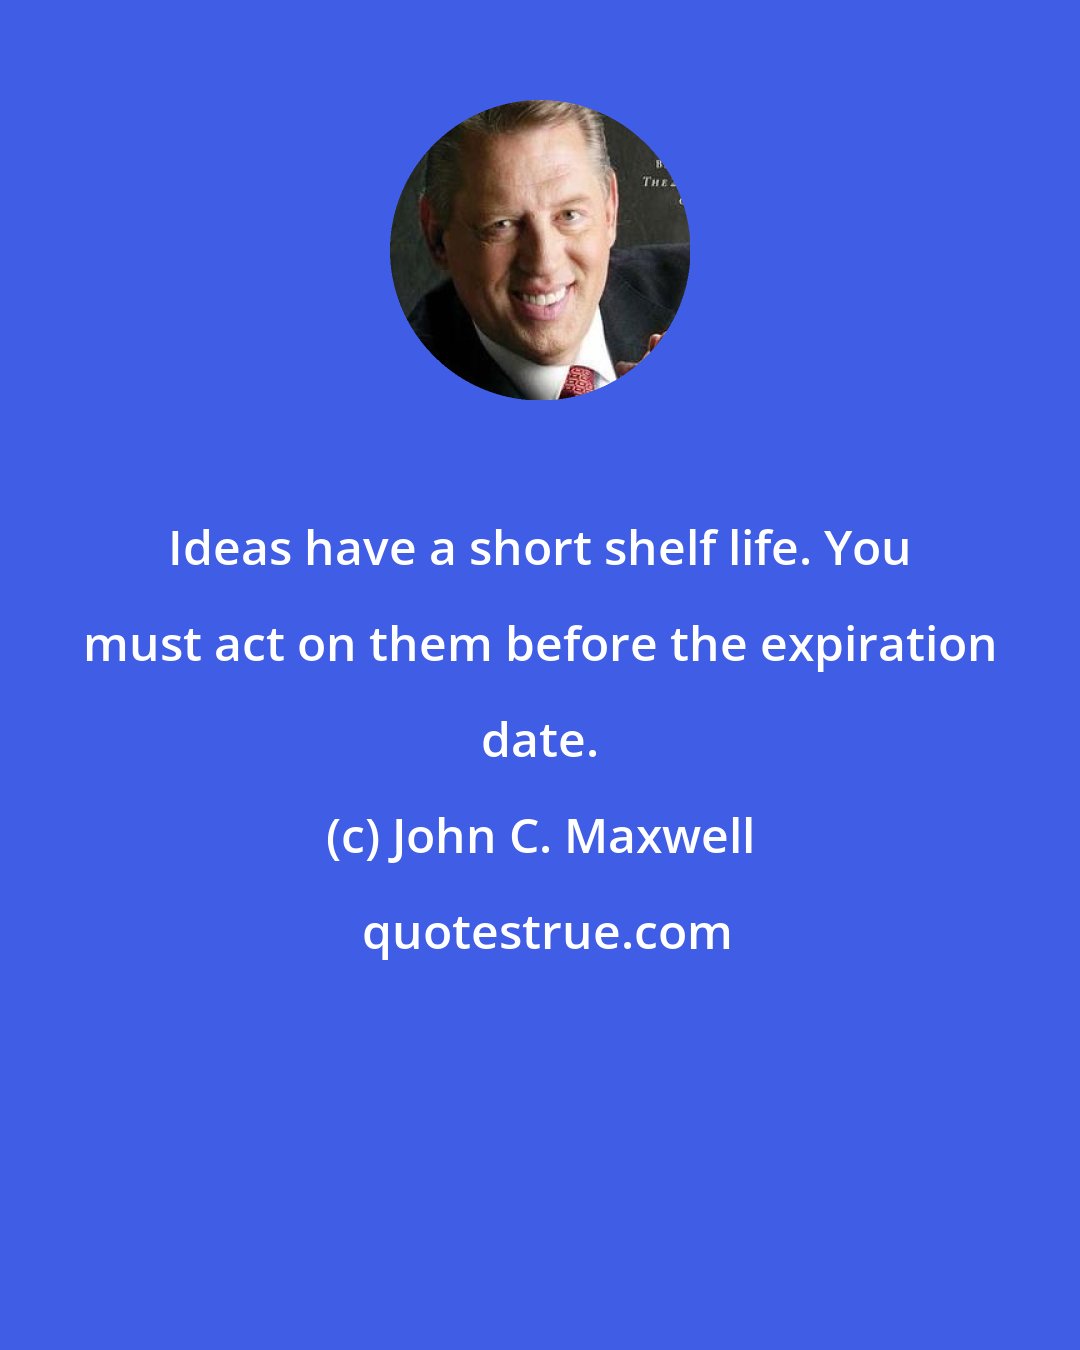 John C. Maxwell: Ideas have a short shelf life. You must act on them before the expiration date.